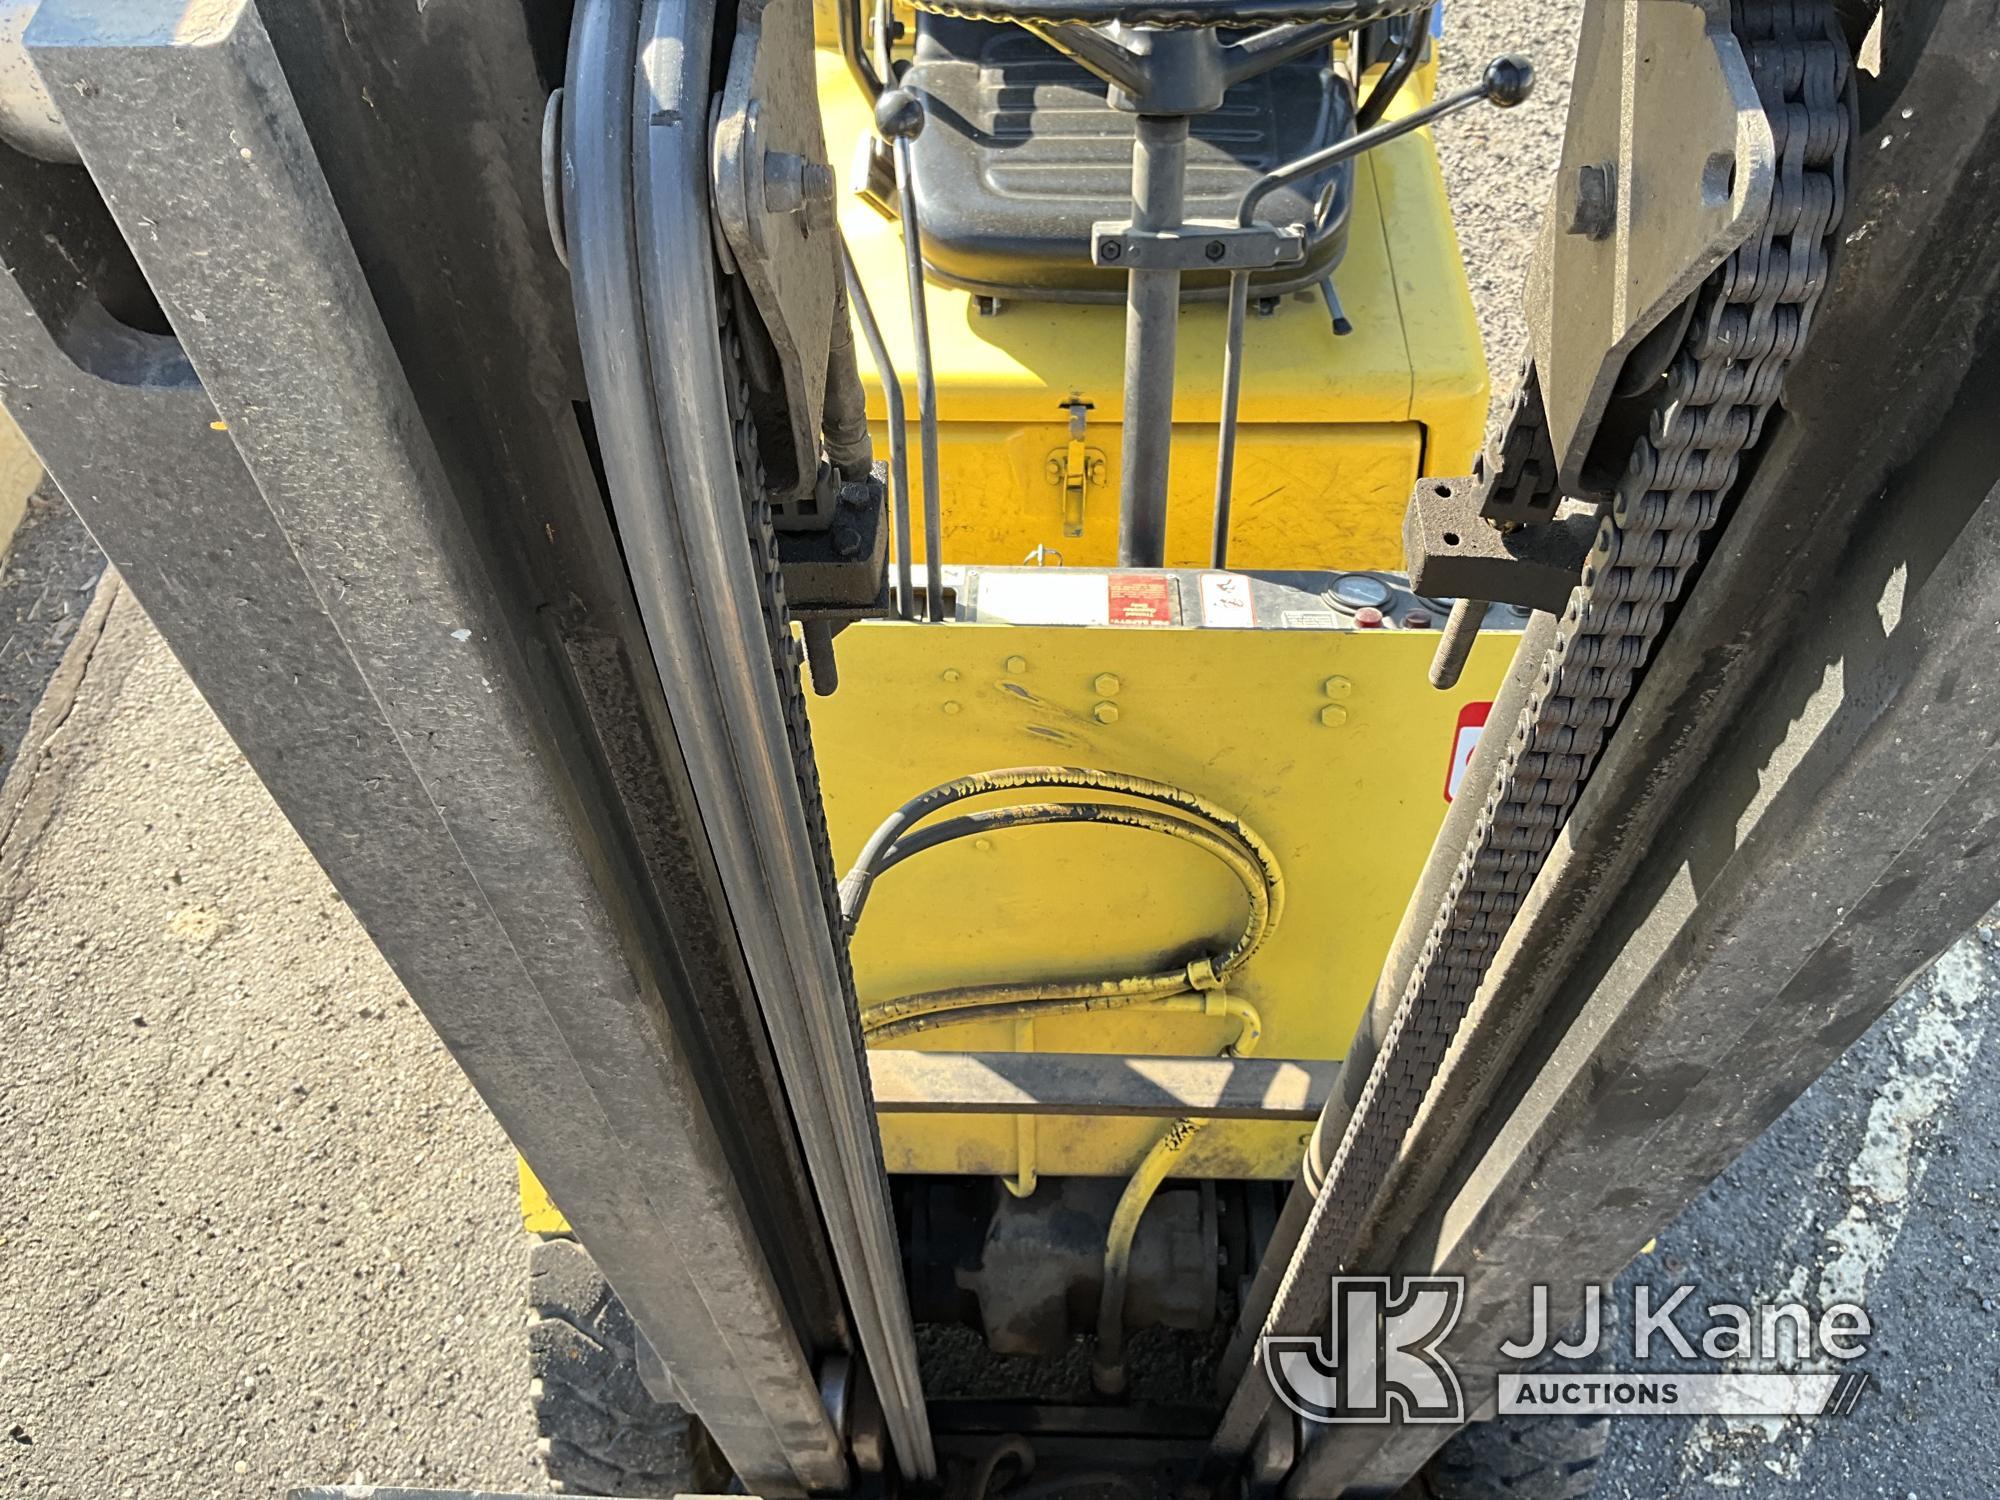 (Lewiston, ID) 1986 Hyster H25XL Pneumatic Tired Forklift Runs, Moves & Operates